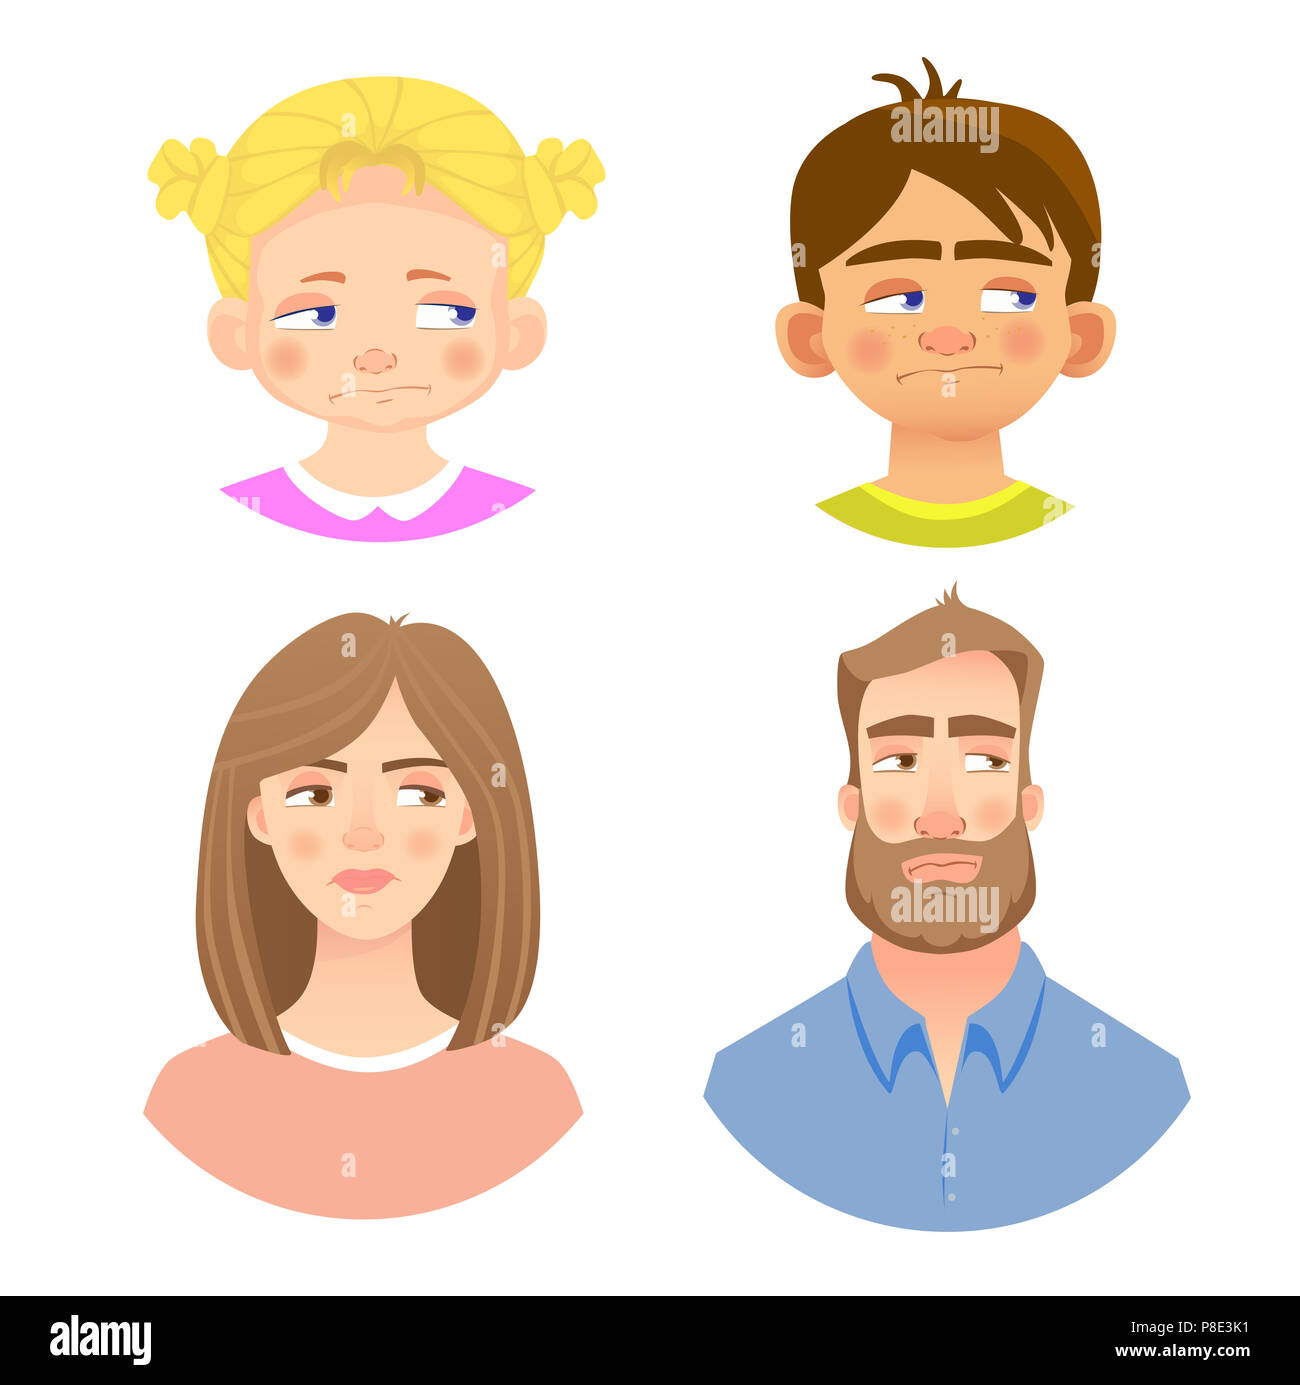 Emotions of human face. Set of avatars with different emotions. Illustration Stock Photo